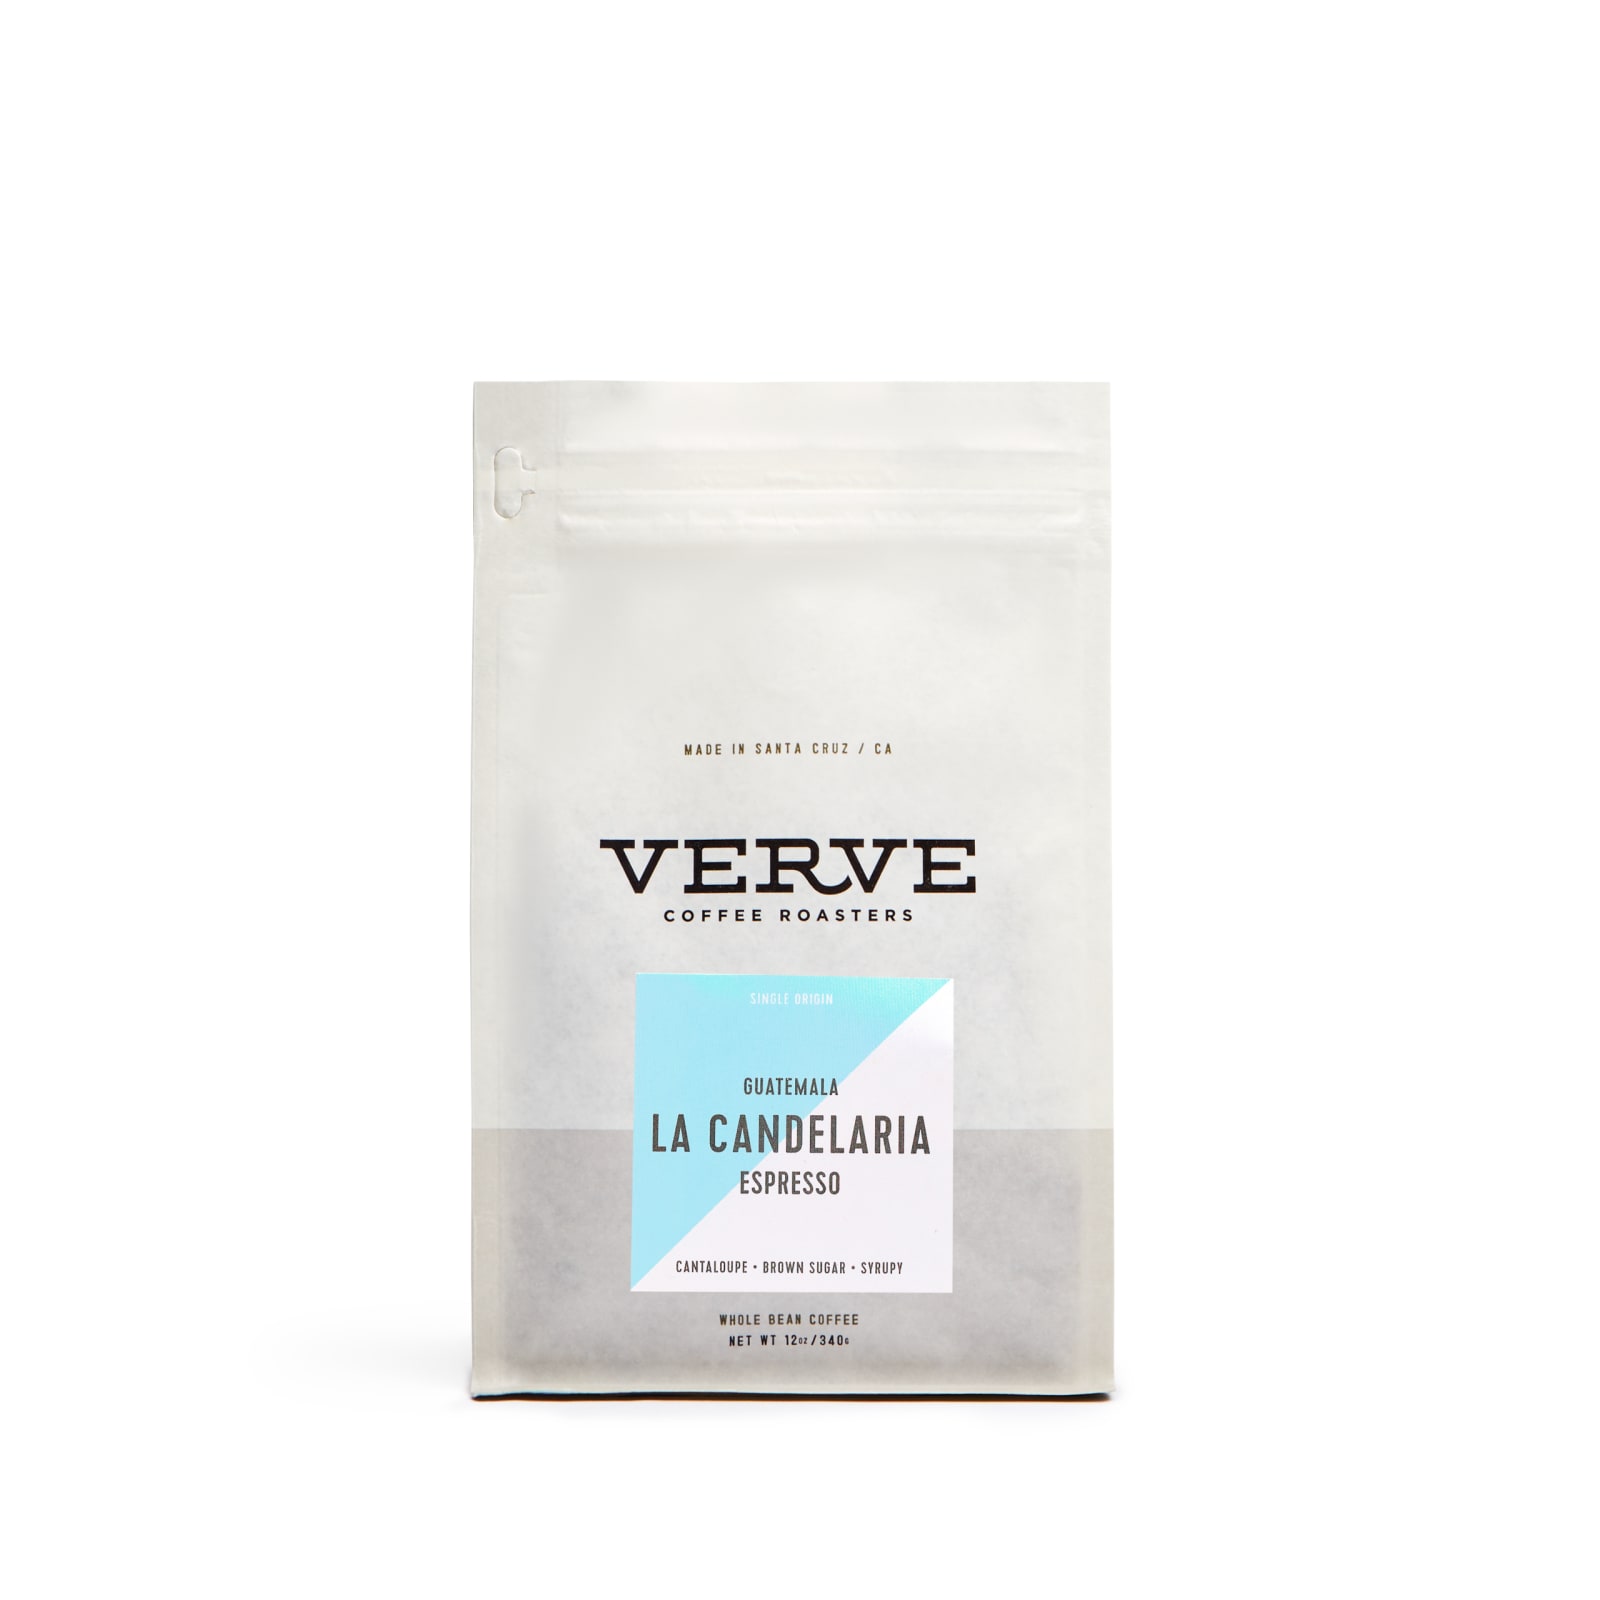 Verve Coffee Review - Must Read This Before Buying